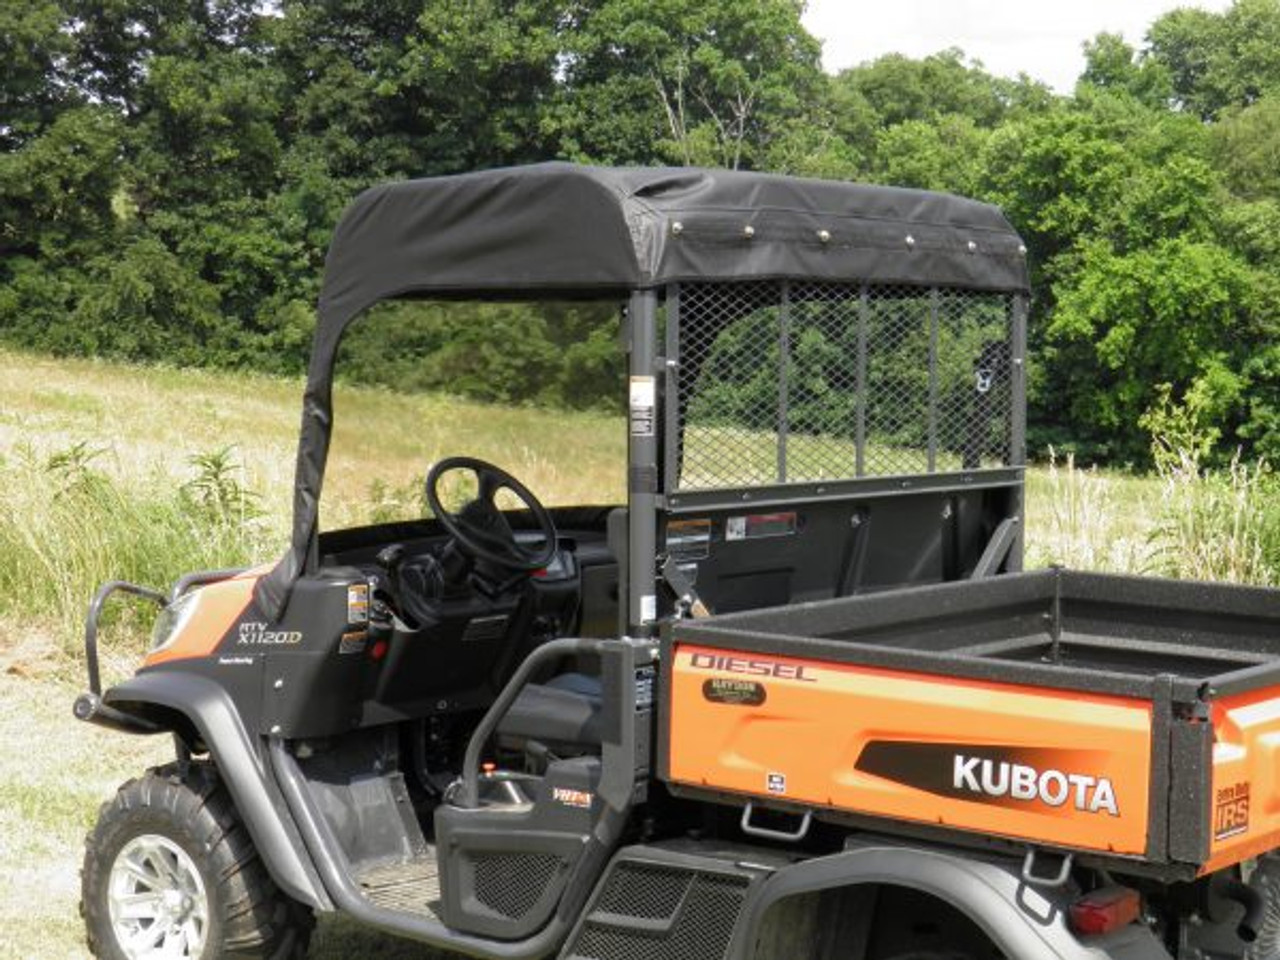 3 Star side x side Kubota RTV XG850 vinyl windshield and top rear and side angle view